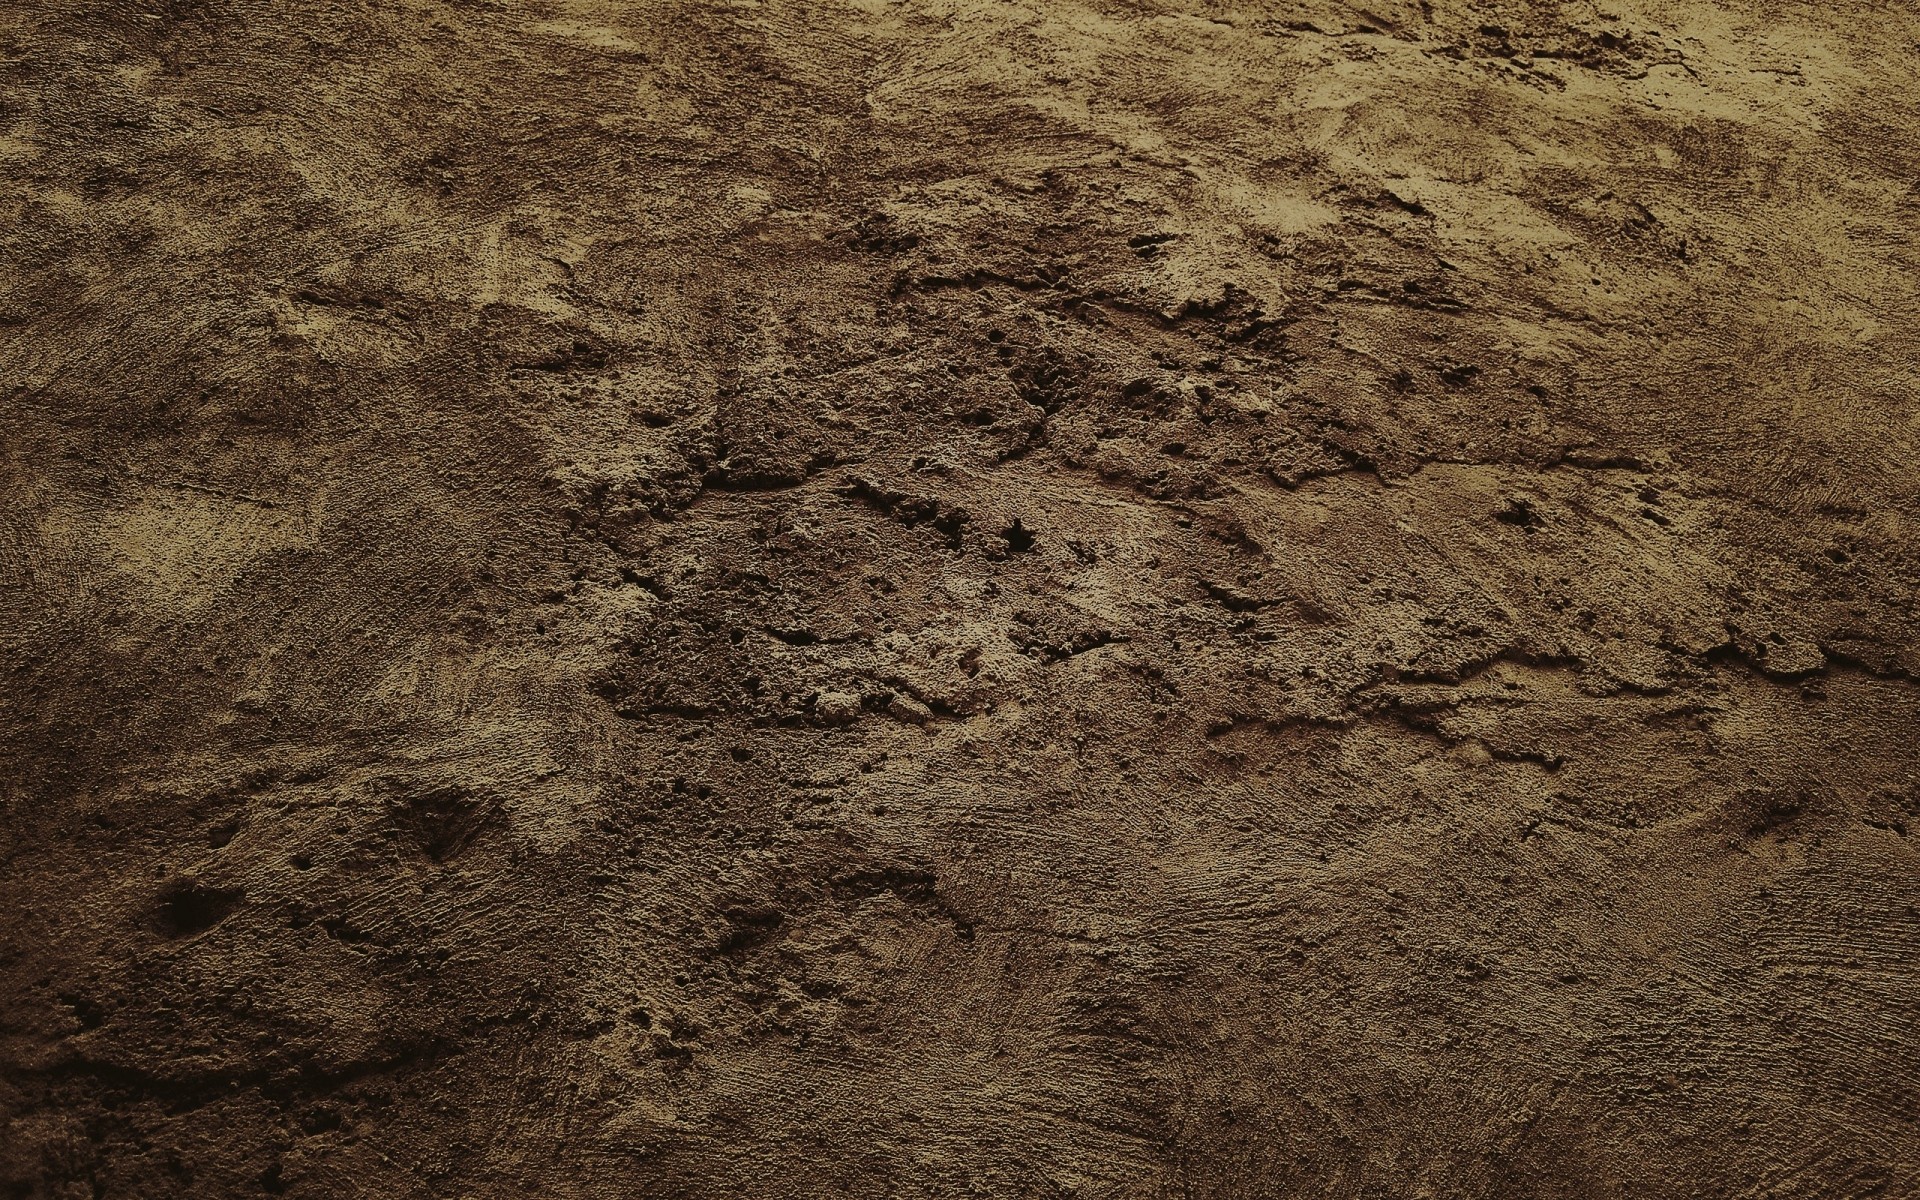 landscapes texture desktop dirty soil pattern rough dark empty abstract cement land field brown background simply